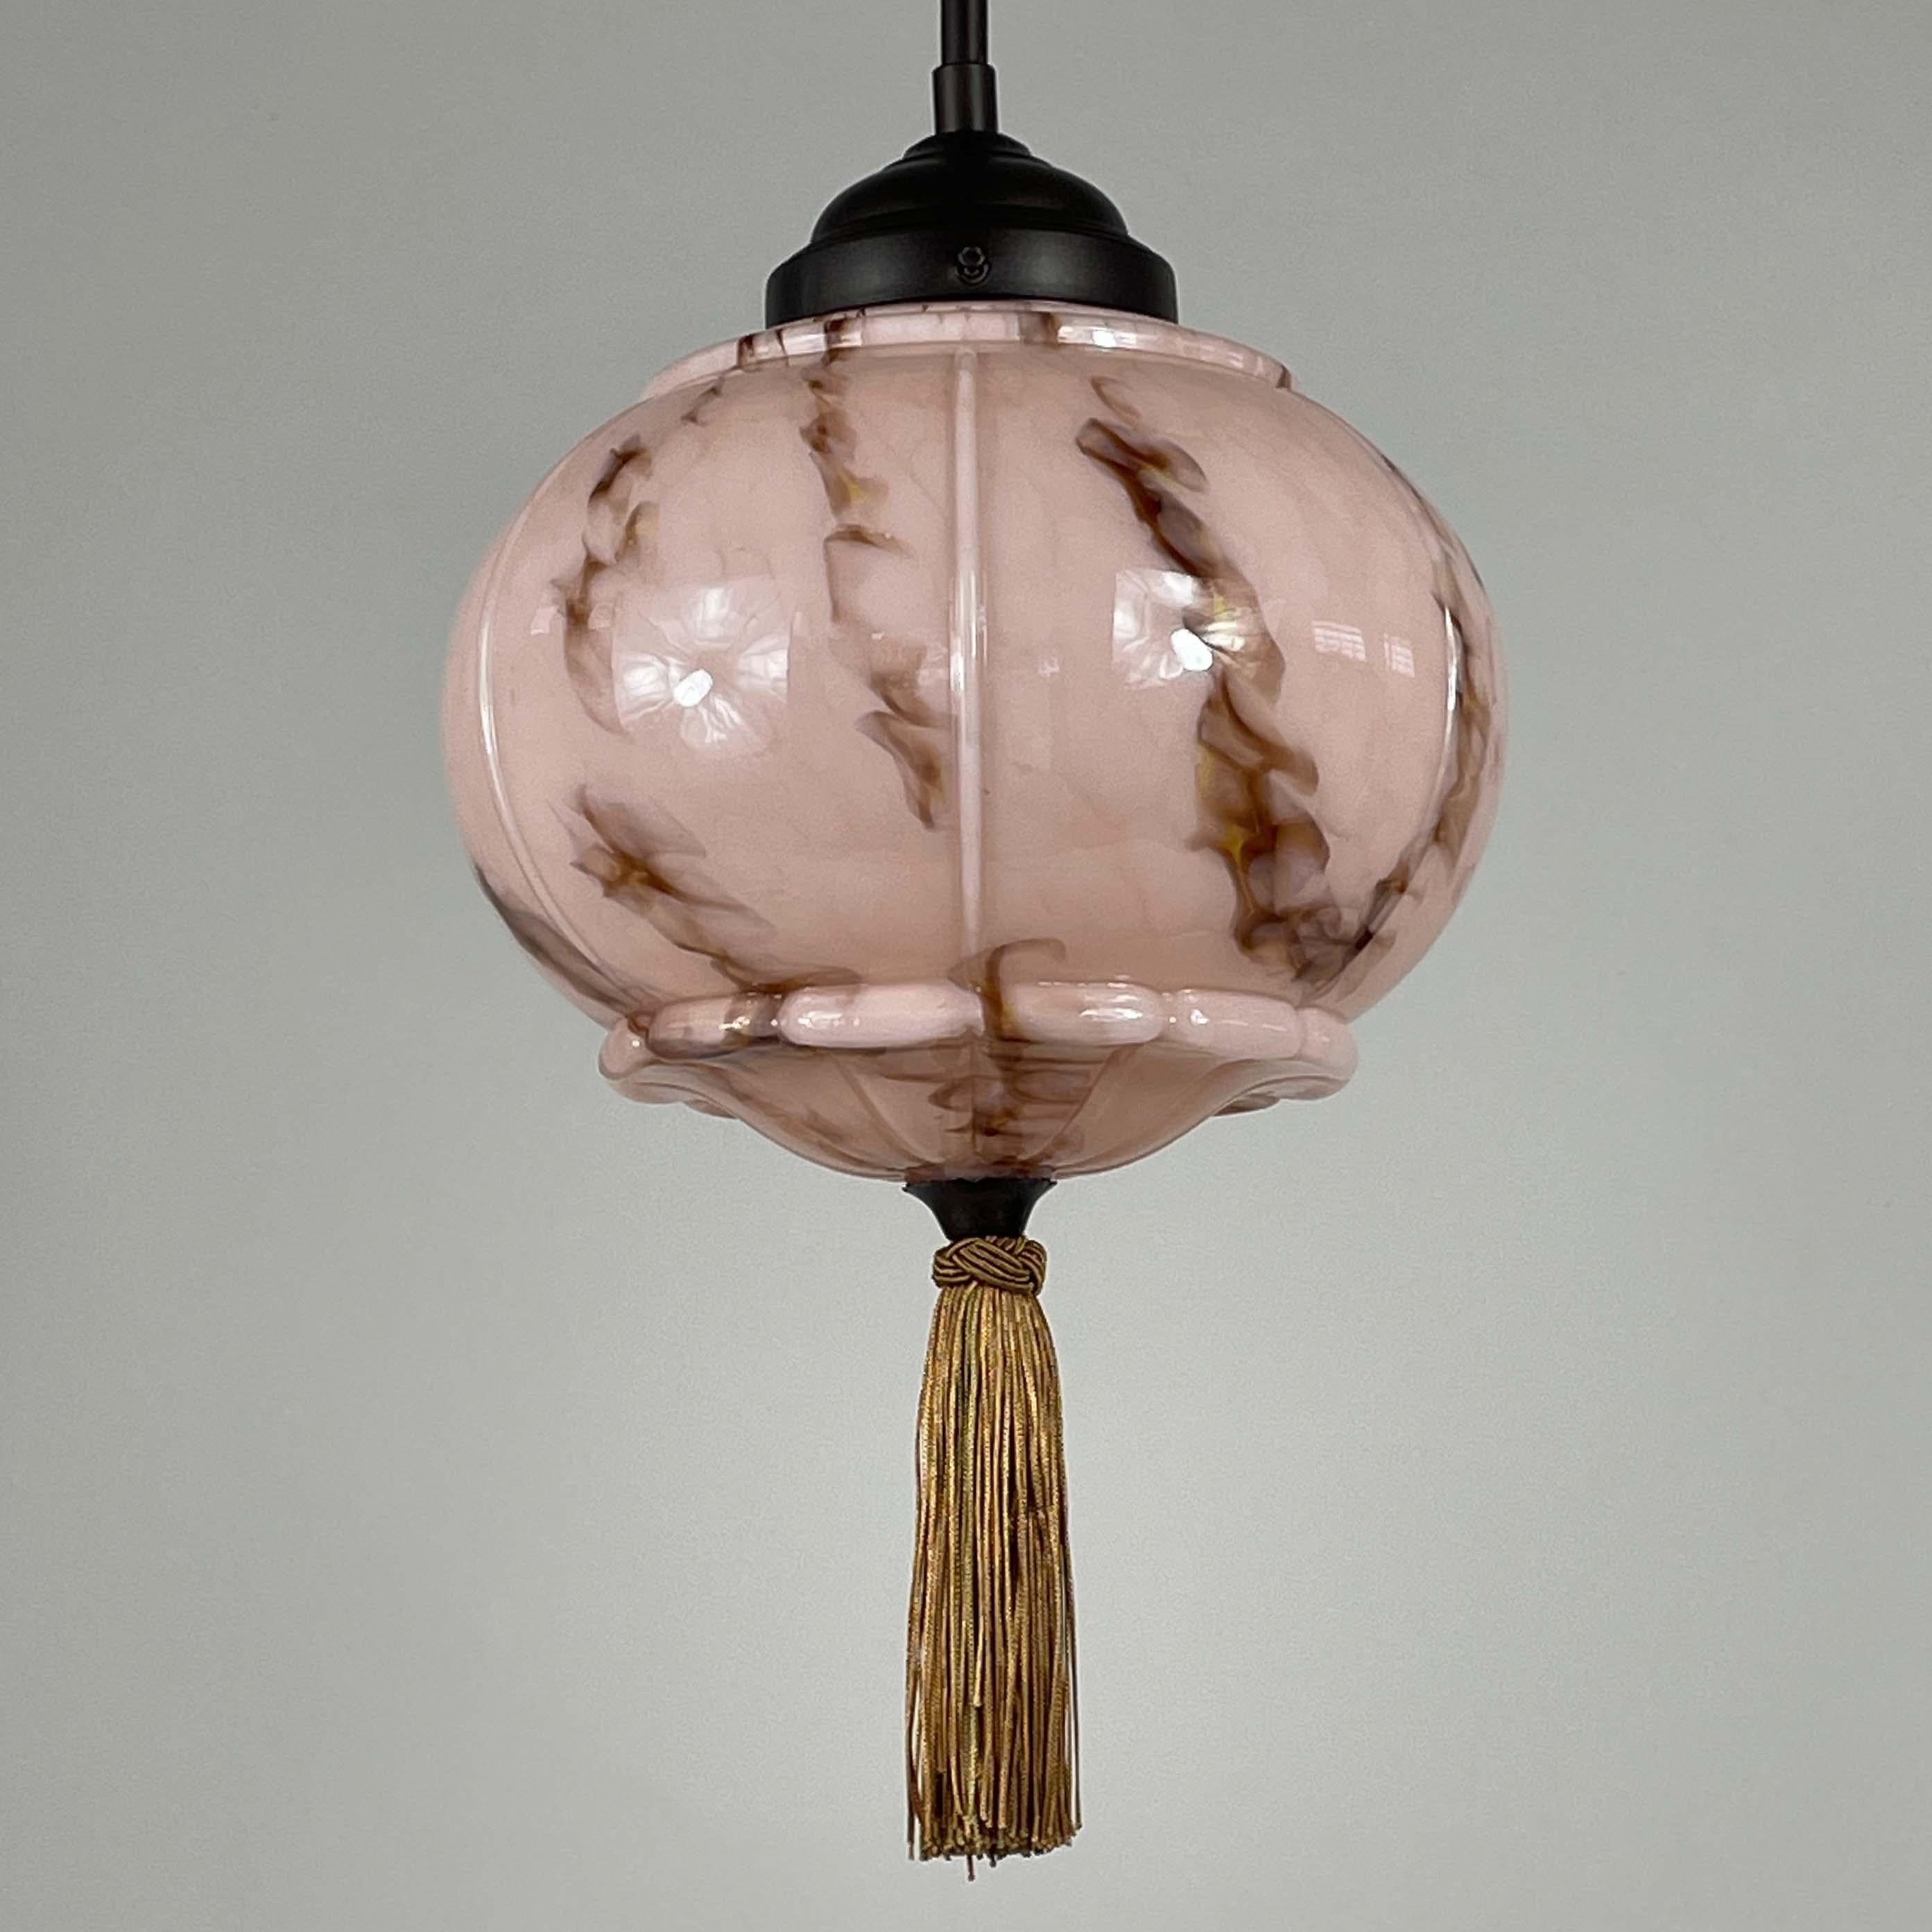 Metal Marbled Pale Rose Opaline & Bronzed Pendant with Tassel, Germany 1920s 1930s